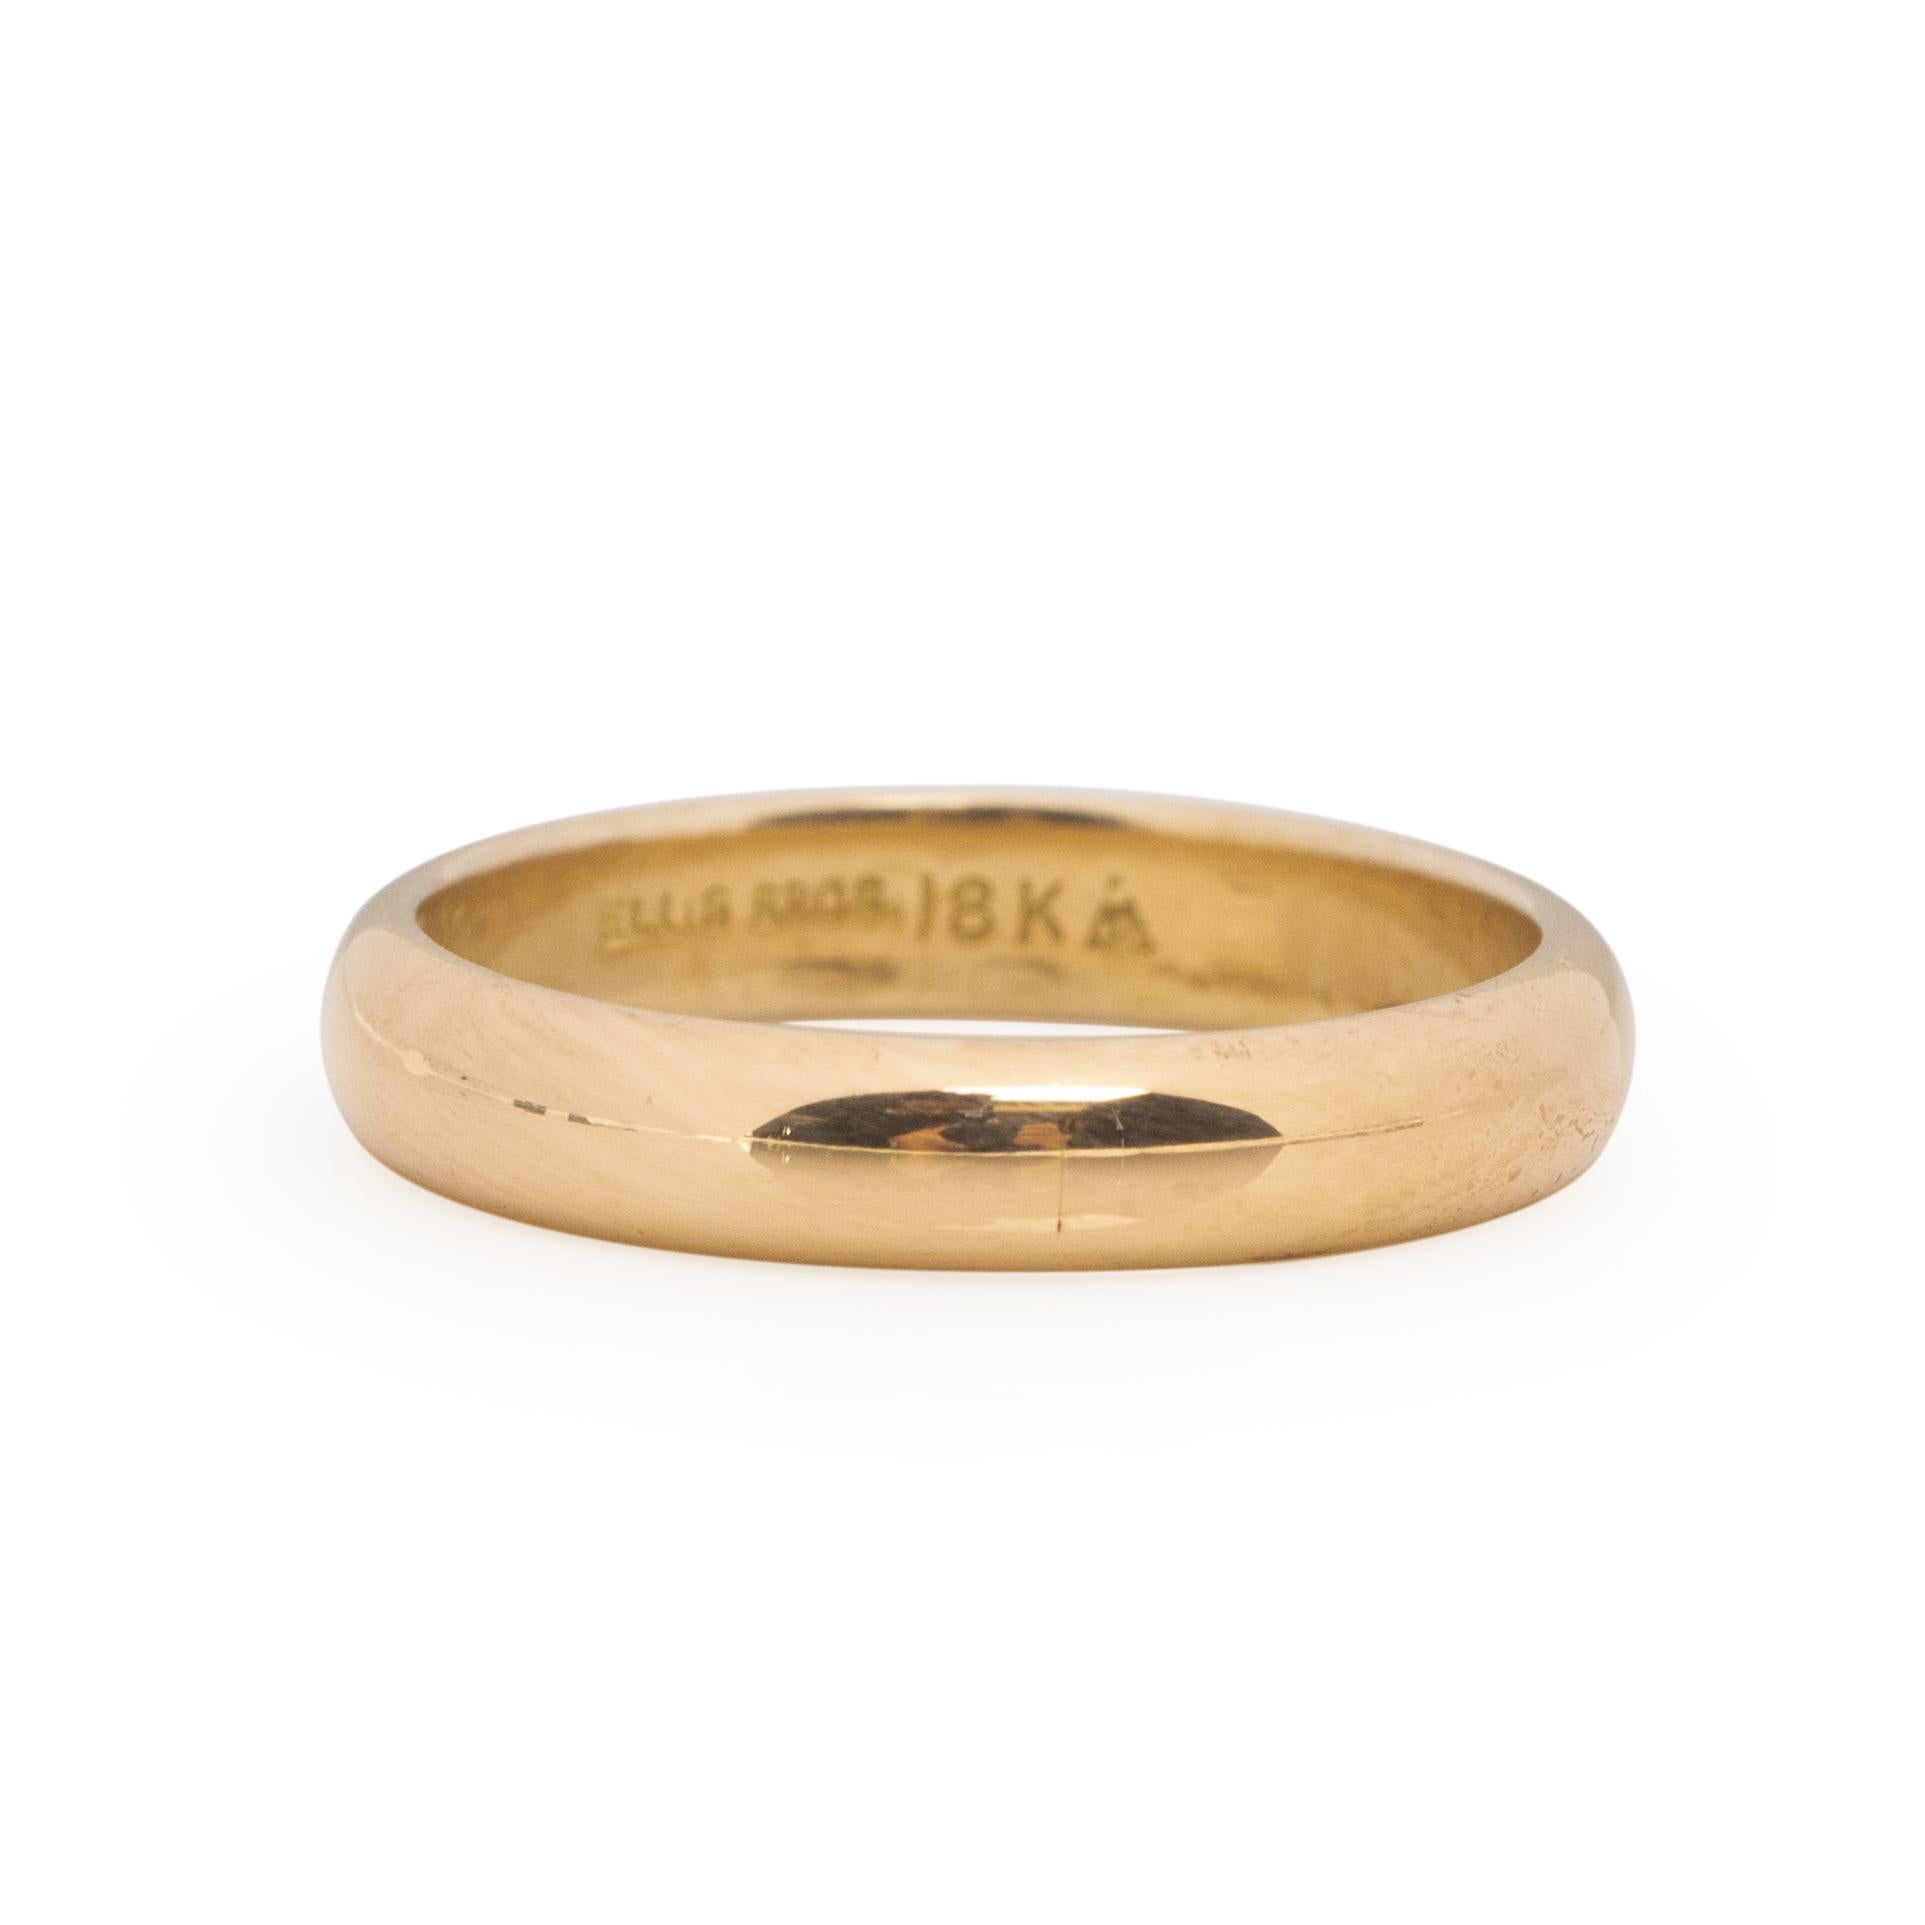 Here we have a beautiful example of a classic smooth finish comfort fit band. Typically worn by men, but acceptable for anyone. perfect as a wedding band, but very versatile. The simple design allows this ring to be worn alone, stacked with other